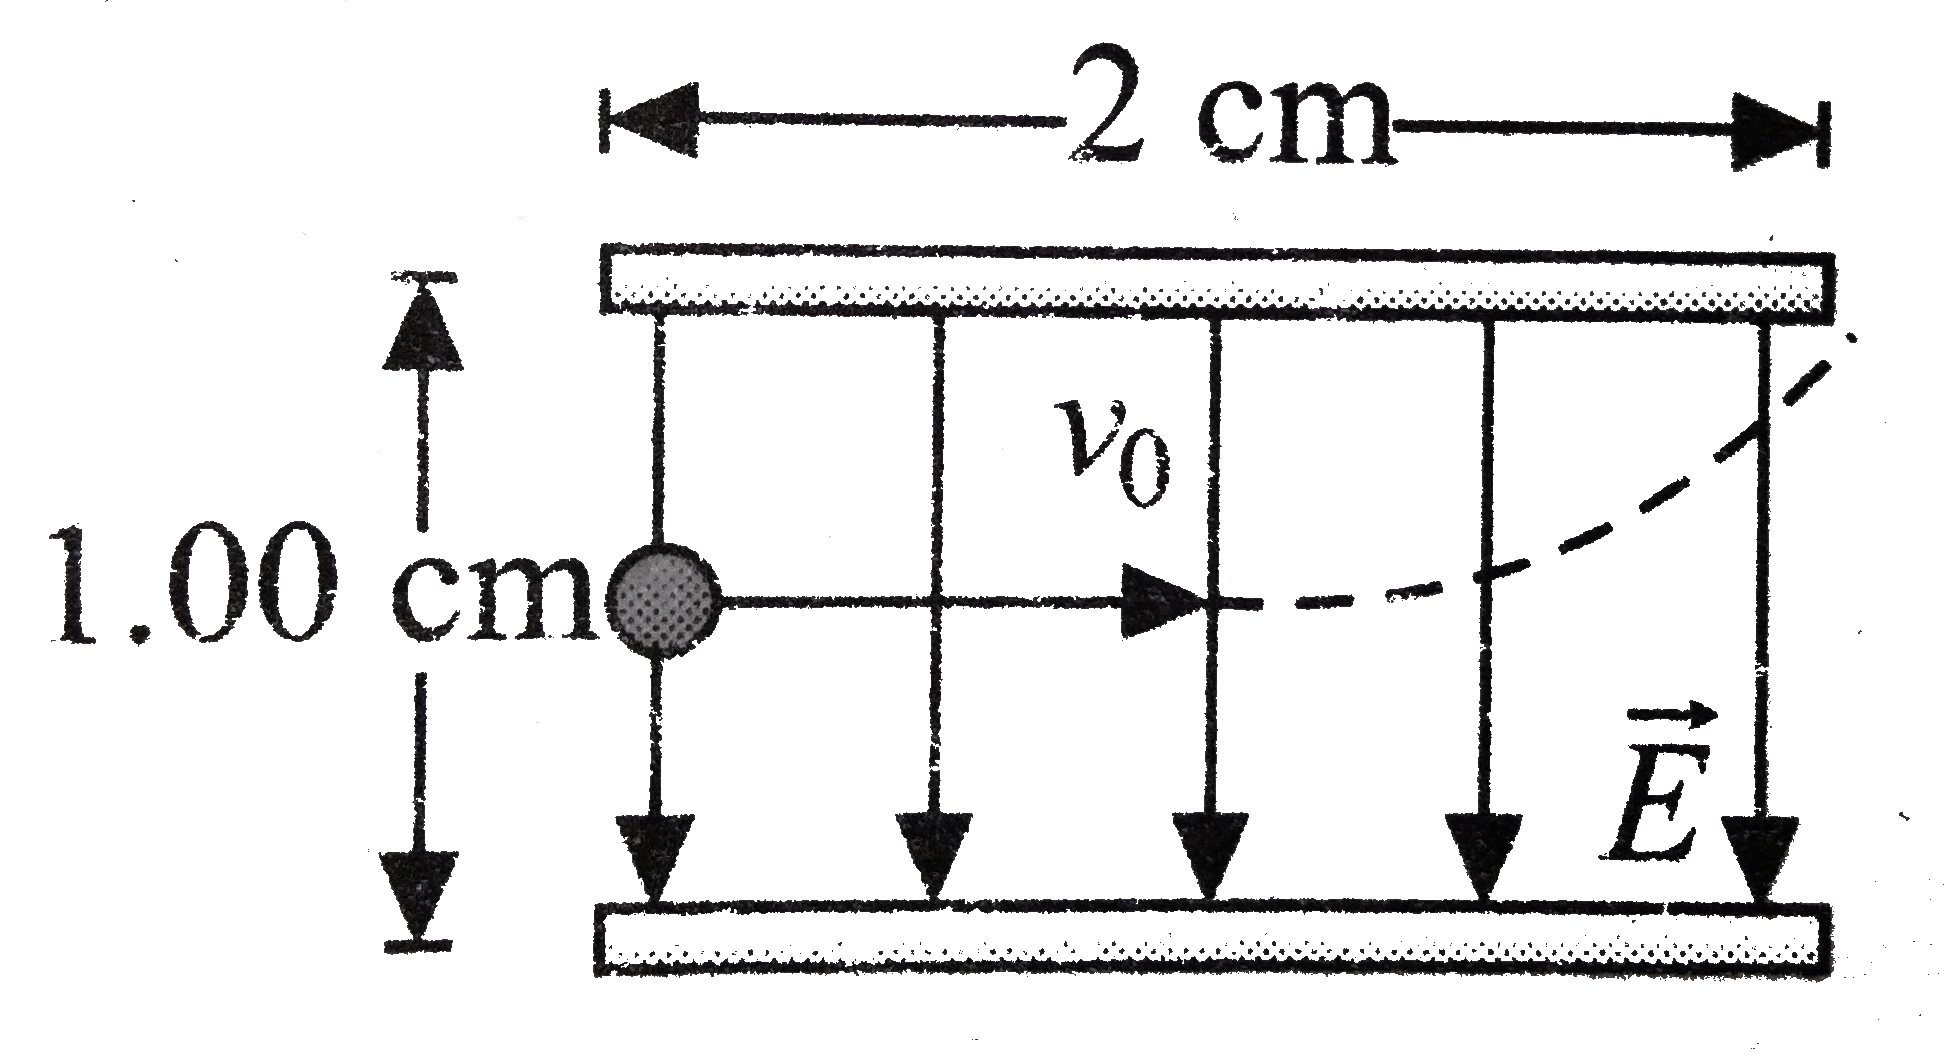 An electron is projected with an initial speed v(0)=1.60xx10^(6)ms^(-1) into the uniform field between the parallel plates as shown in fig. Assume that the field between the plates is uniform and directed vertically downward, and that the field outside the plates is zero. the electrons enters the field at a point midway between the plates. Mass of electron is 9.1xx10^(-31)kg.       If the electron just misses the upper plate, the time of fight of the electron up to this instant is